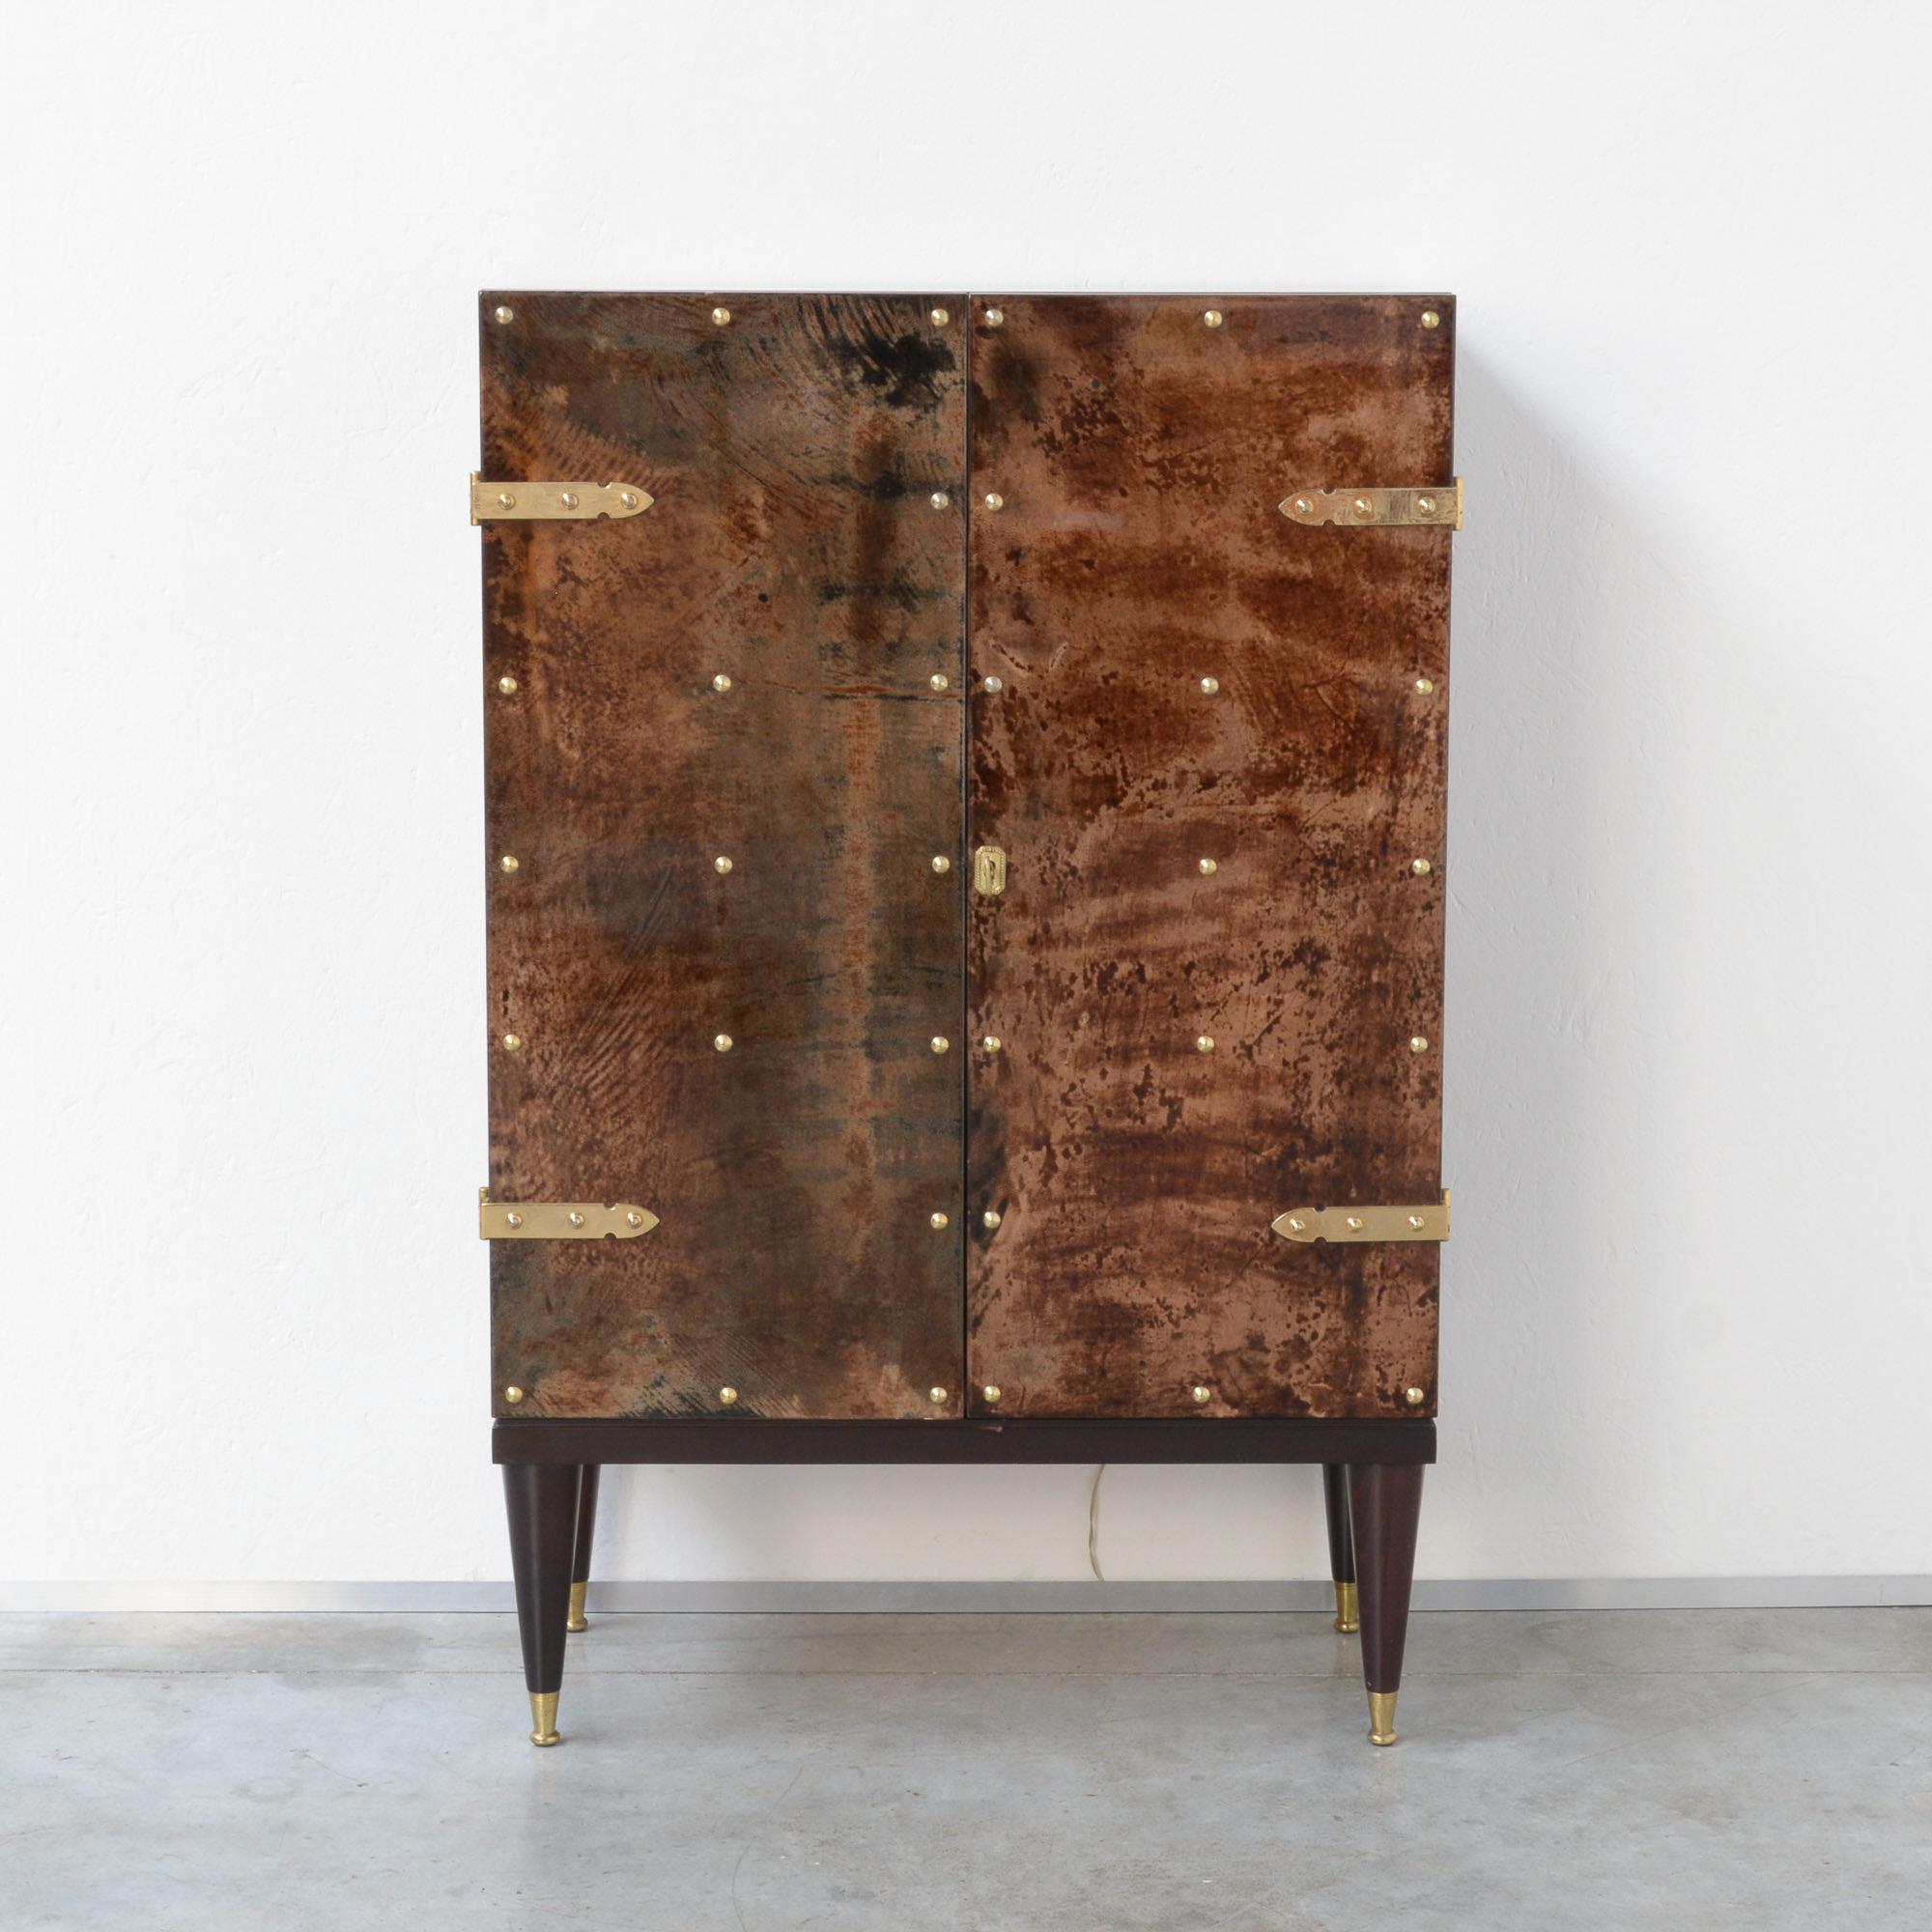 This elegant exclusive bar cabinet was designed by the Italian furniture designer Aldo Tura and can be dated in the late 1950s.
The wooden cabinet is finished with brown colored and lacquered goatskin, completed with brass details. The base is made